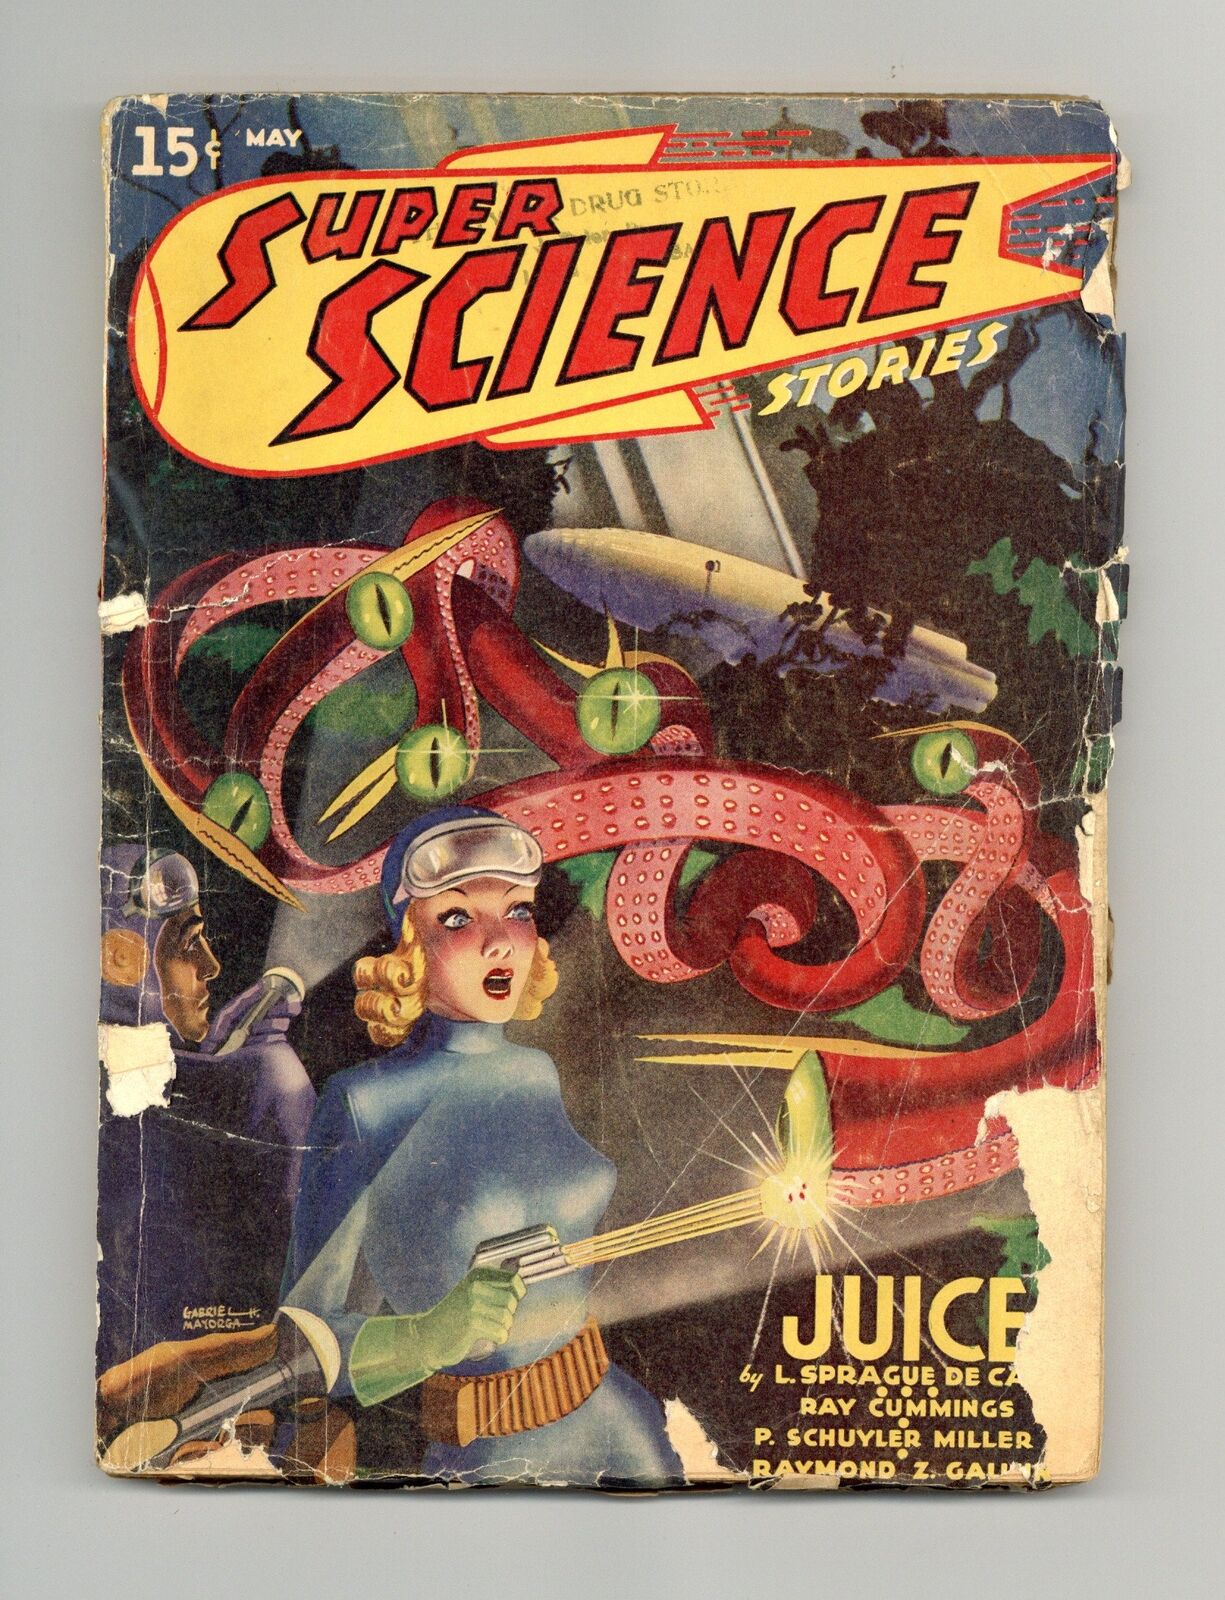 Super Science Stories Pulp May 1940 Vol. 1 #2 GD- 1.8